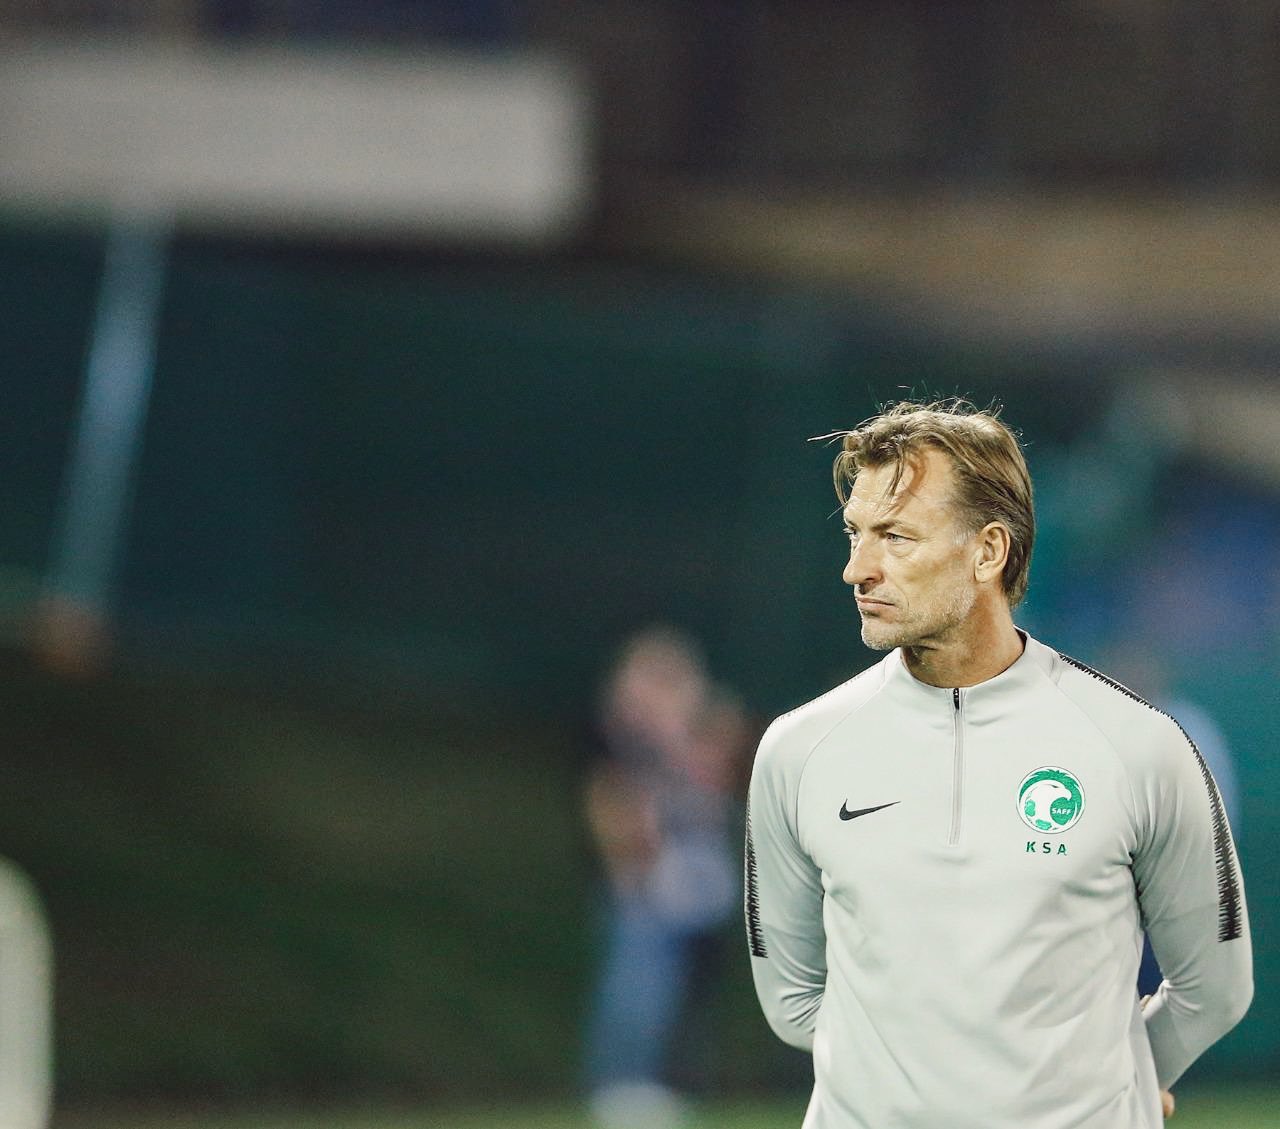 Hervé Renard on X: I decided to participate at my level in the